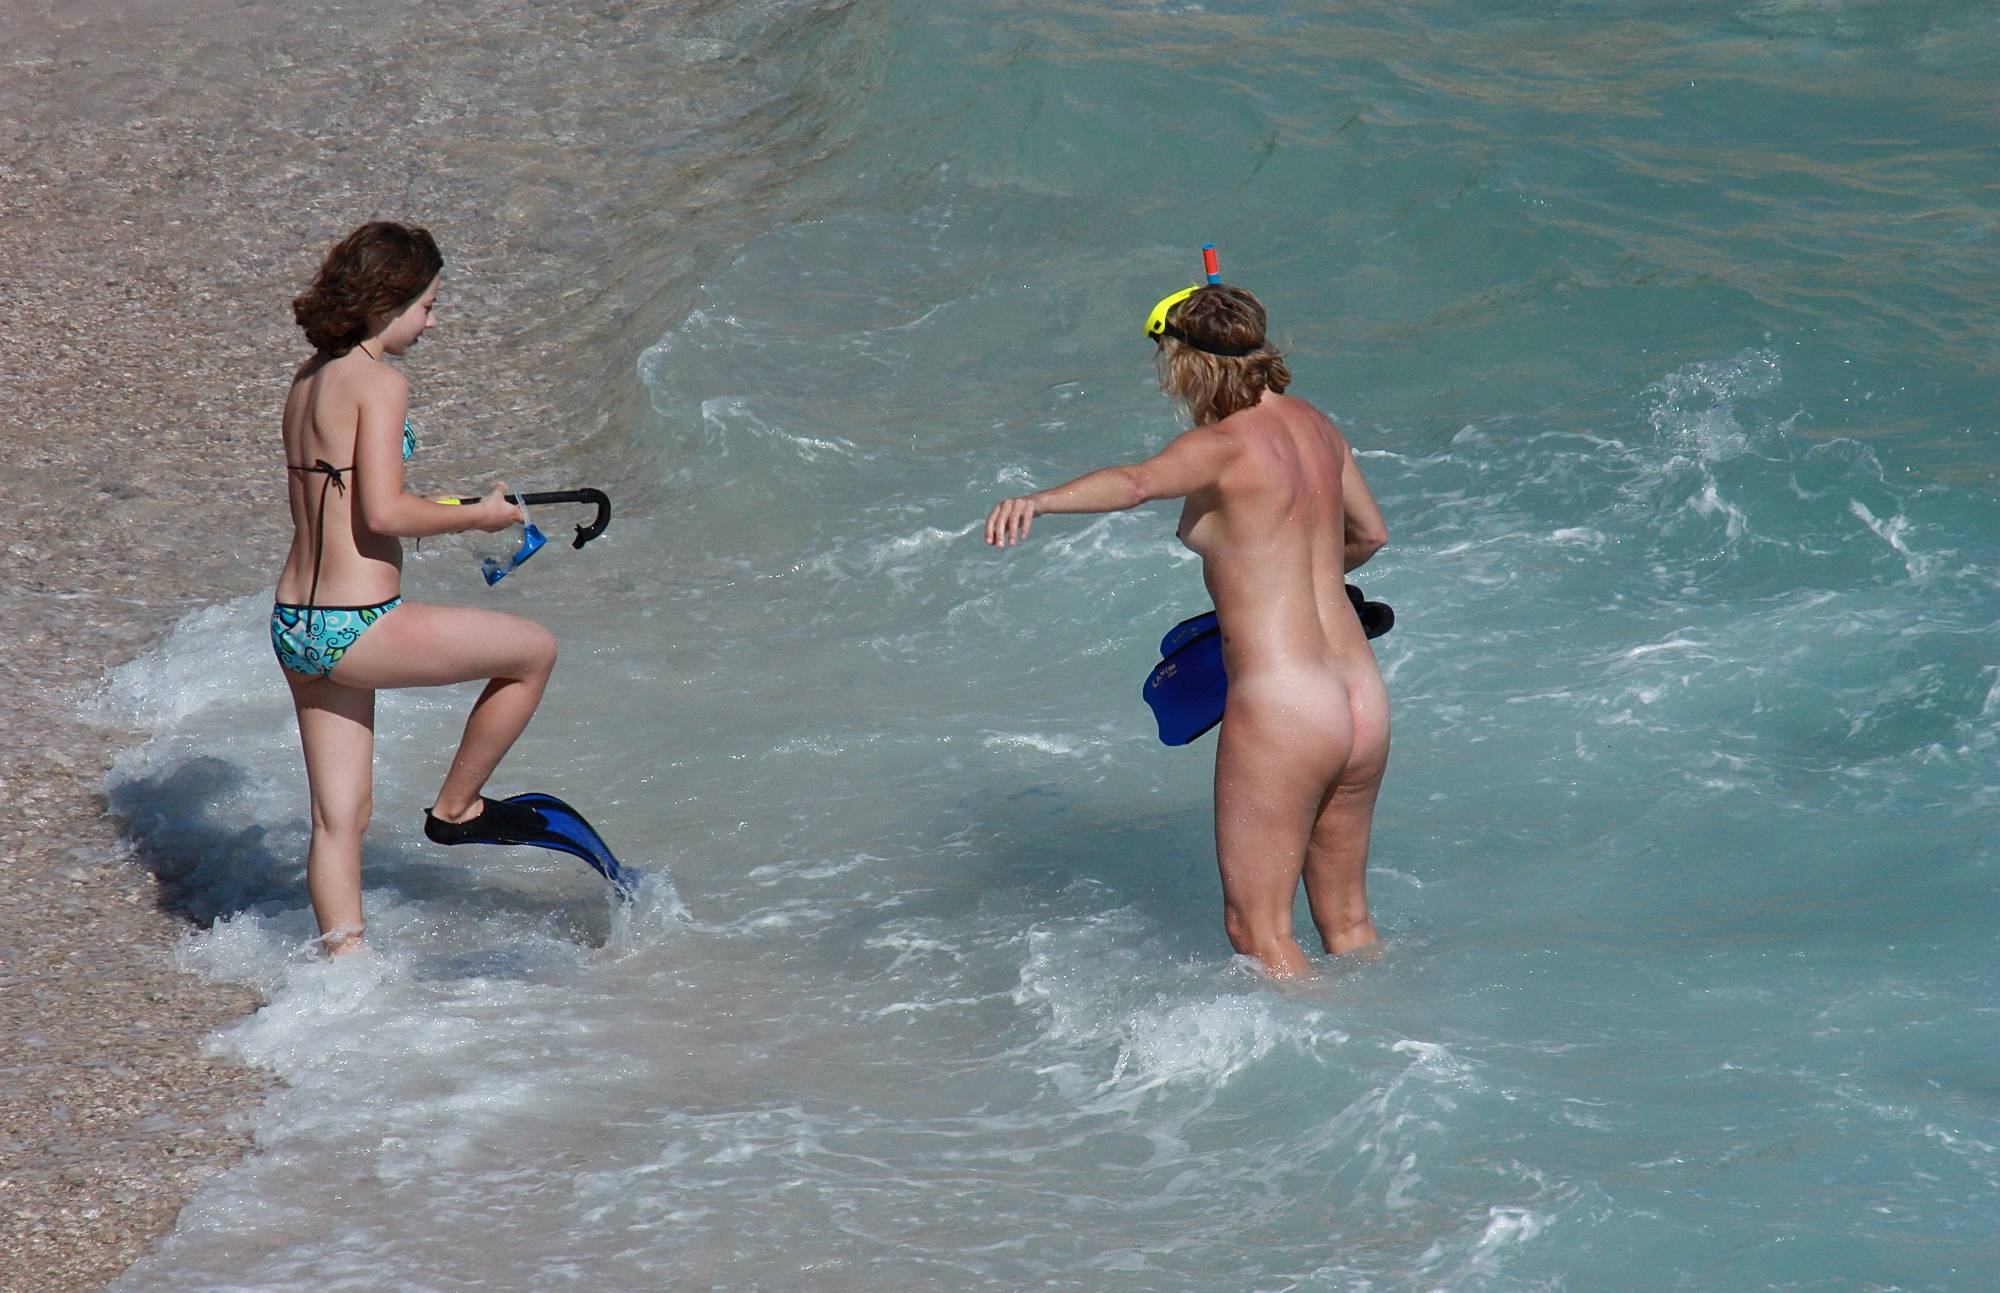 Pure Nudism Pics-Snorkeling For Treasures - 3